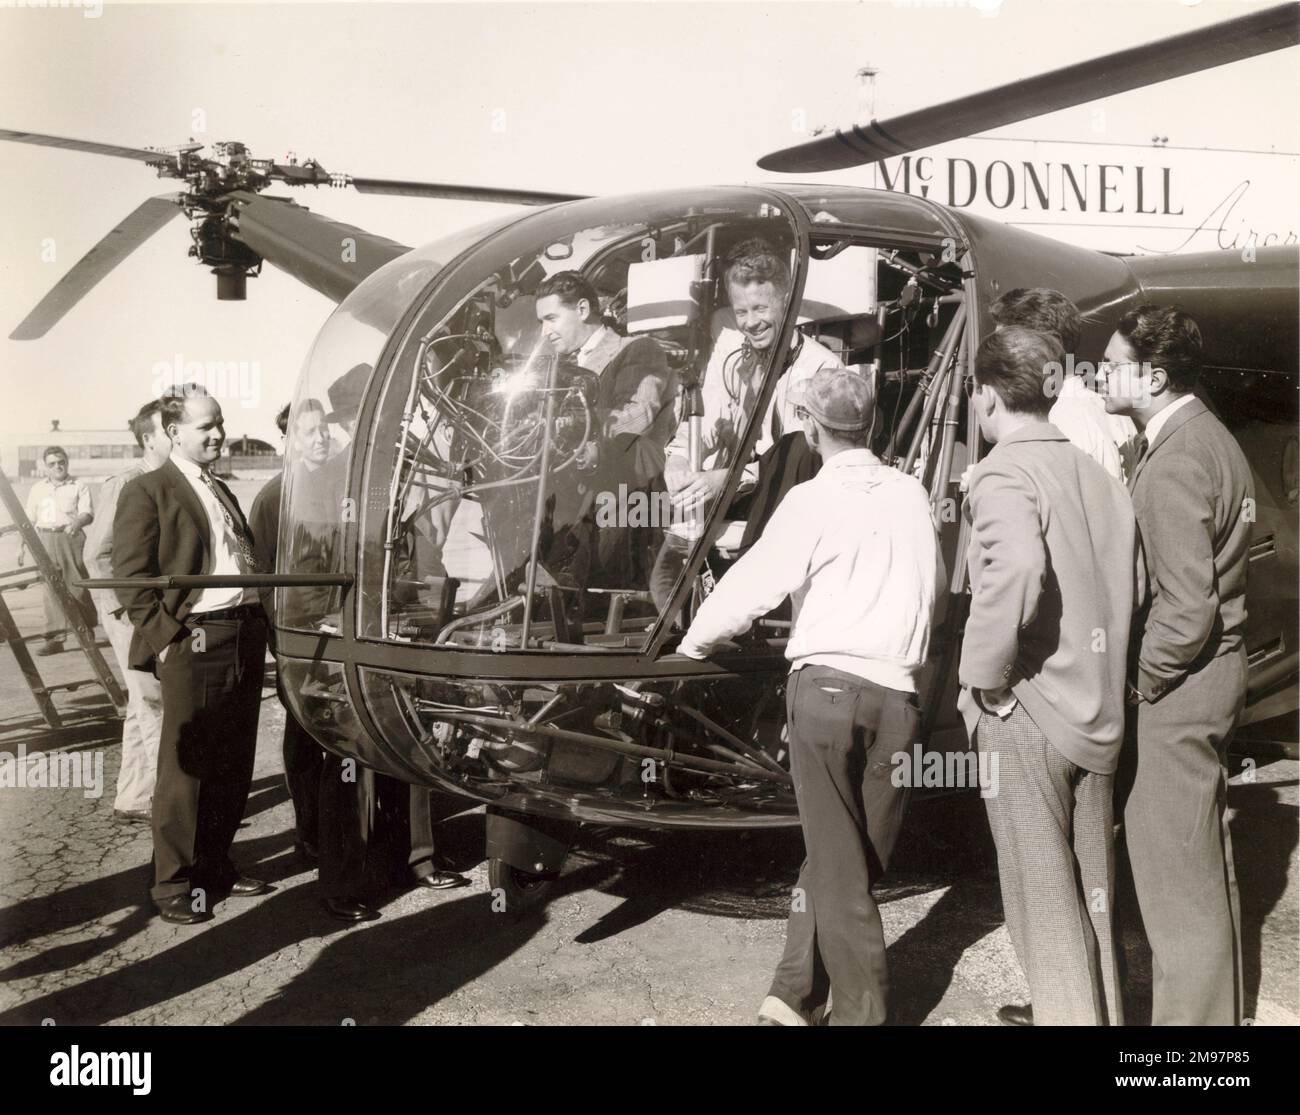 McDonnell XHJH-1 Whirlaway, 24 October 1946. Stock Photo